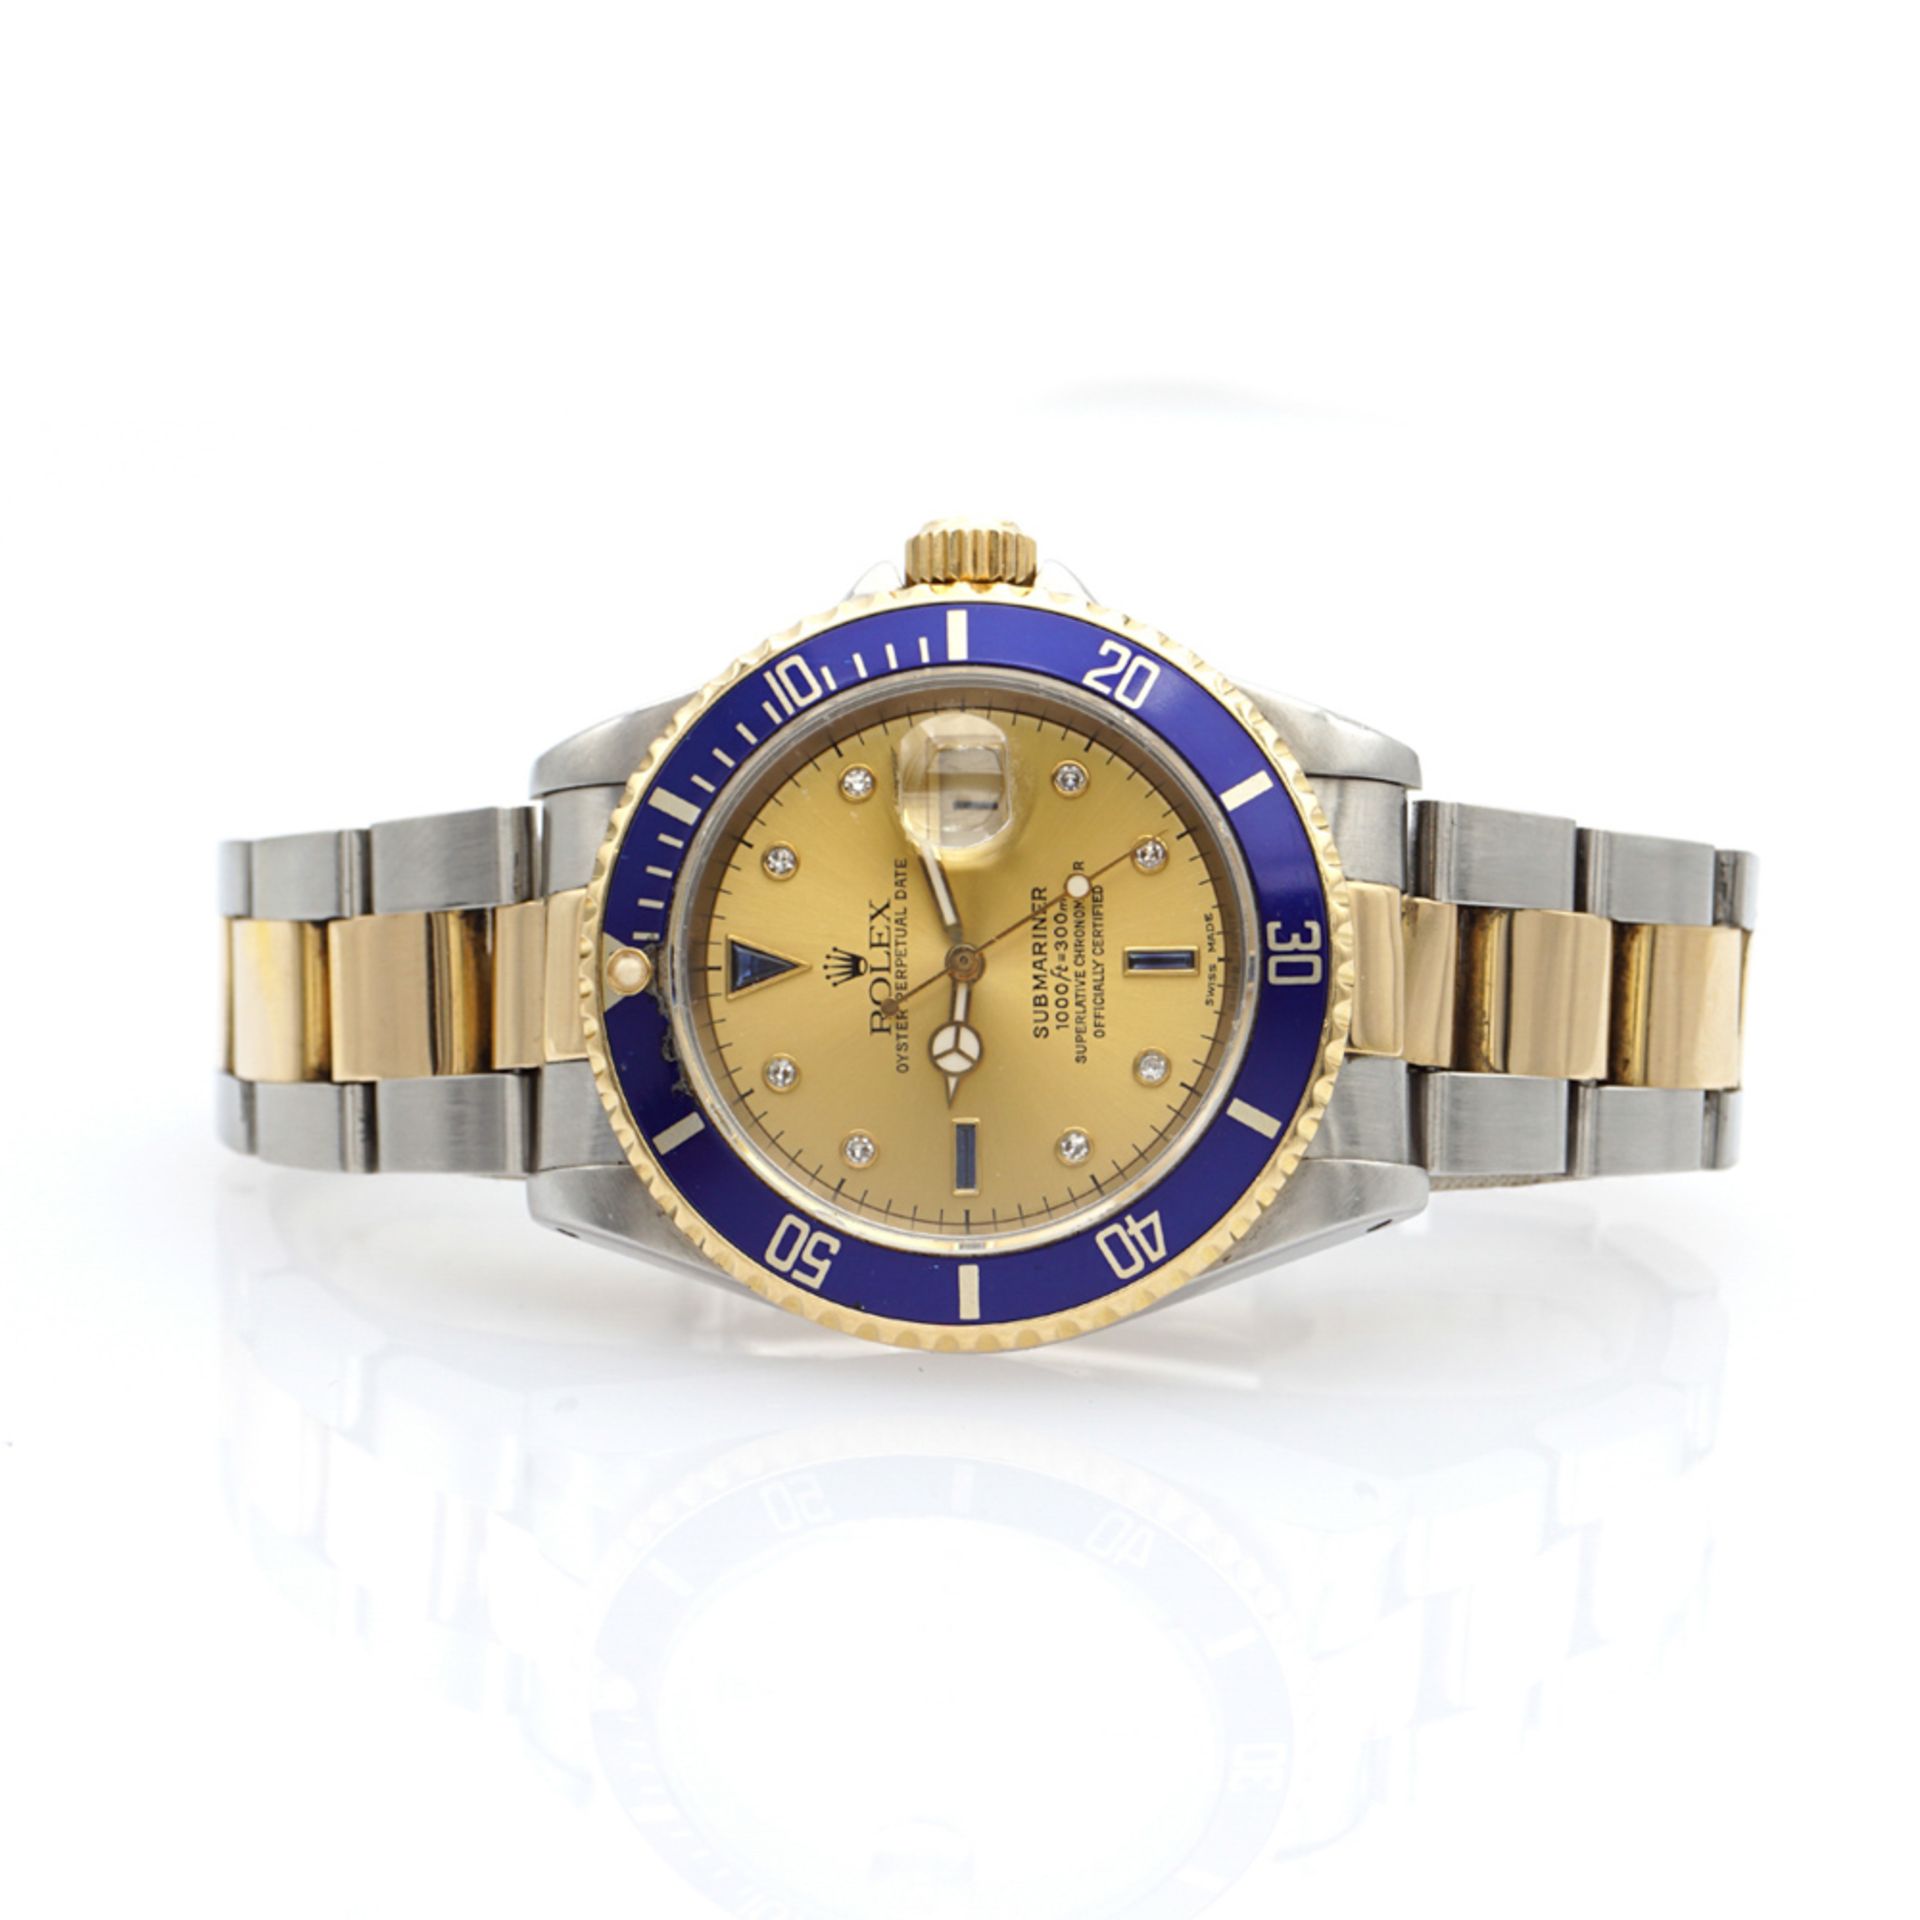 Rolex Submarine Sultan Oyster Perpetual Date, wrist watch 1990s - Image 3 of 6